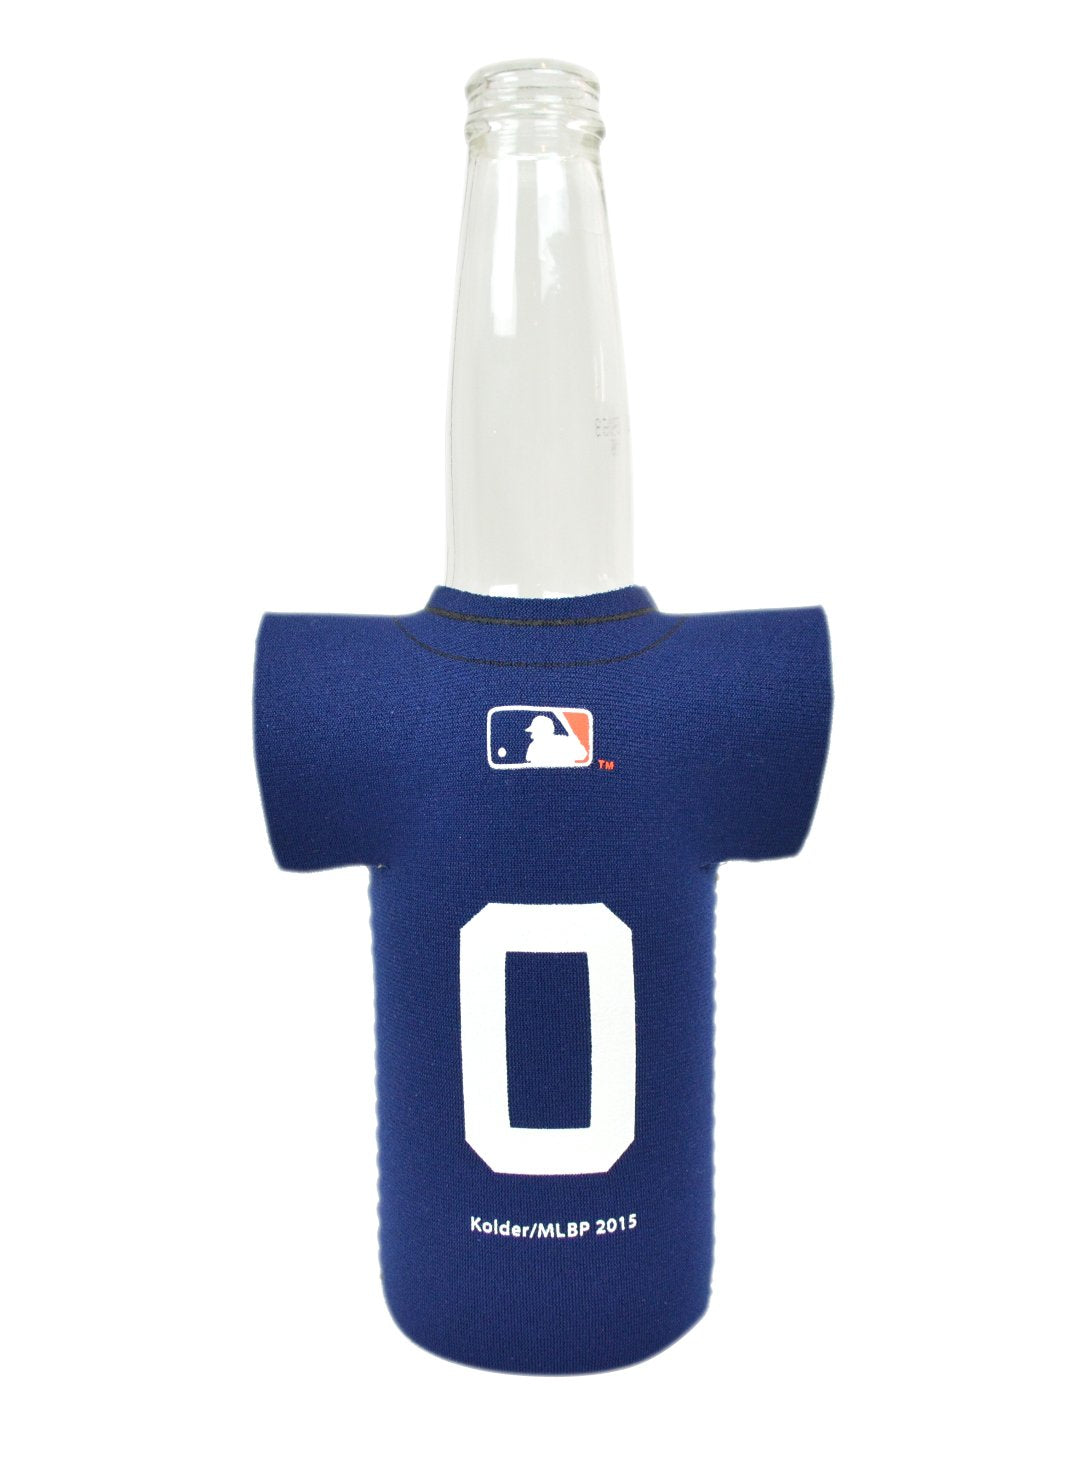 Official Major League Baseball Fan Shop Authentic MLB 2-pack Insulated Bottle Team Jersey Cooler